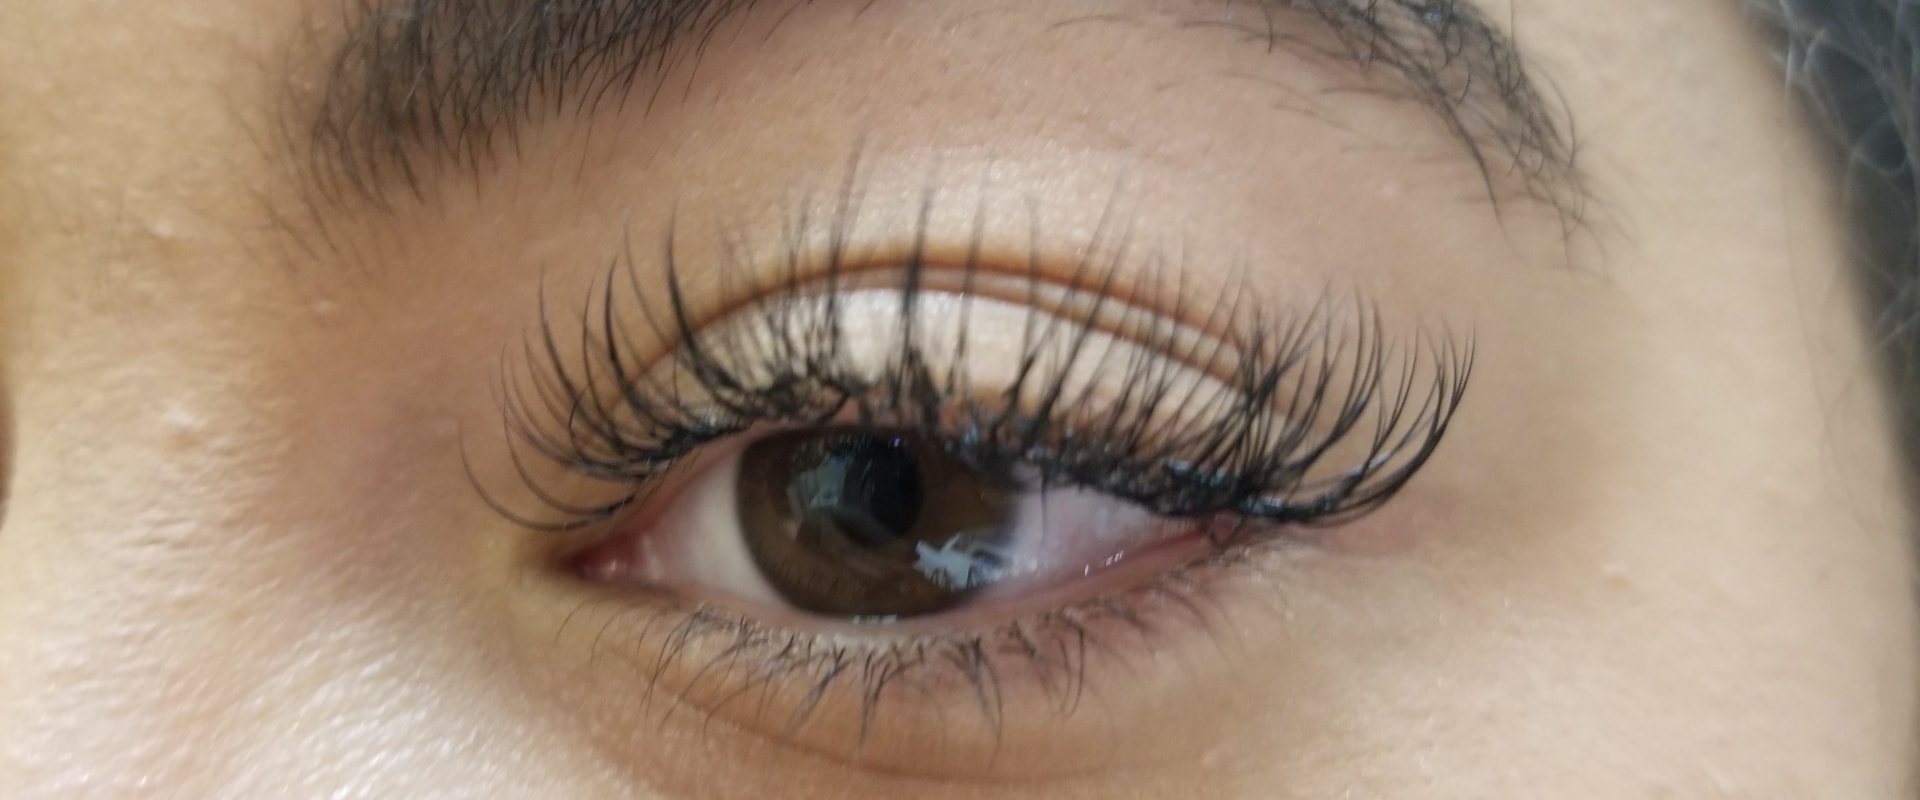 What type of eyelash extensions look natural?